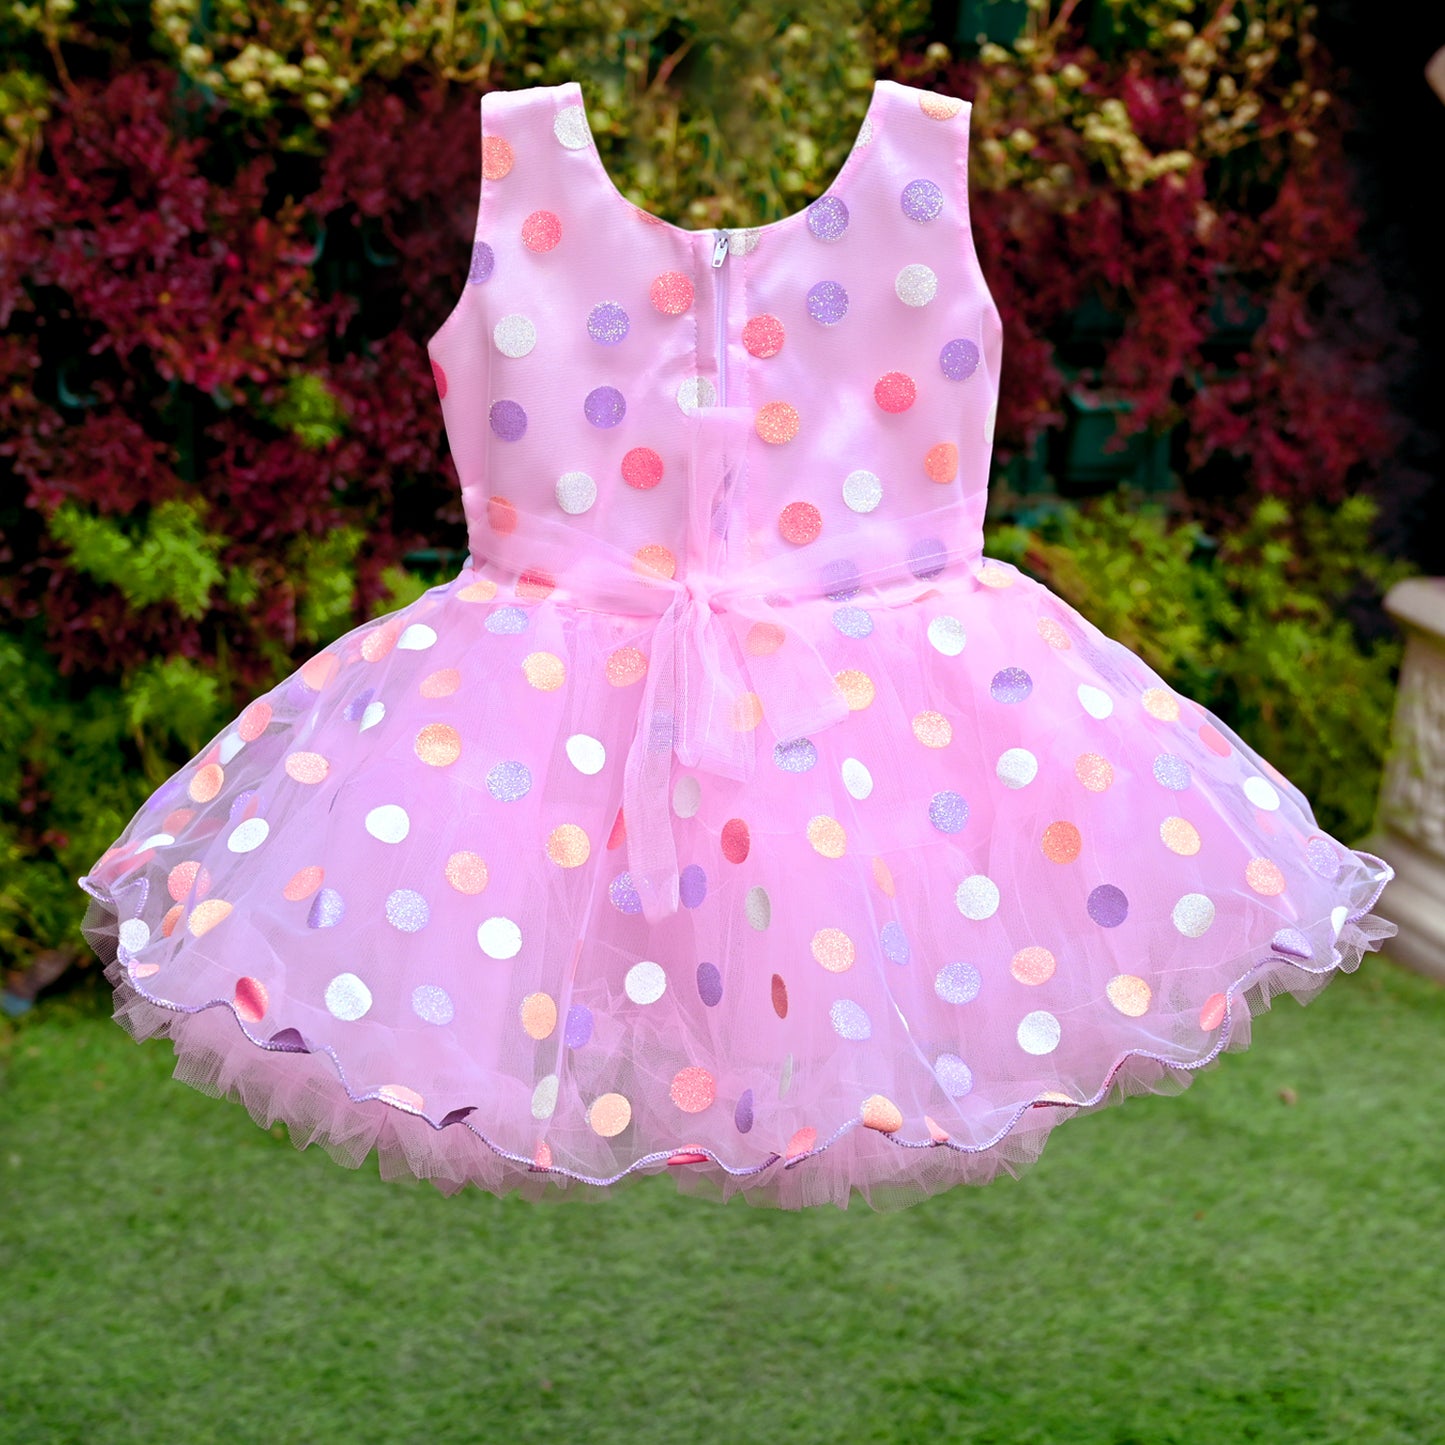 Polka Net Baby Party Frock (Pink)